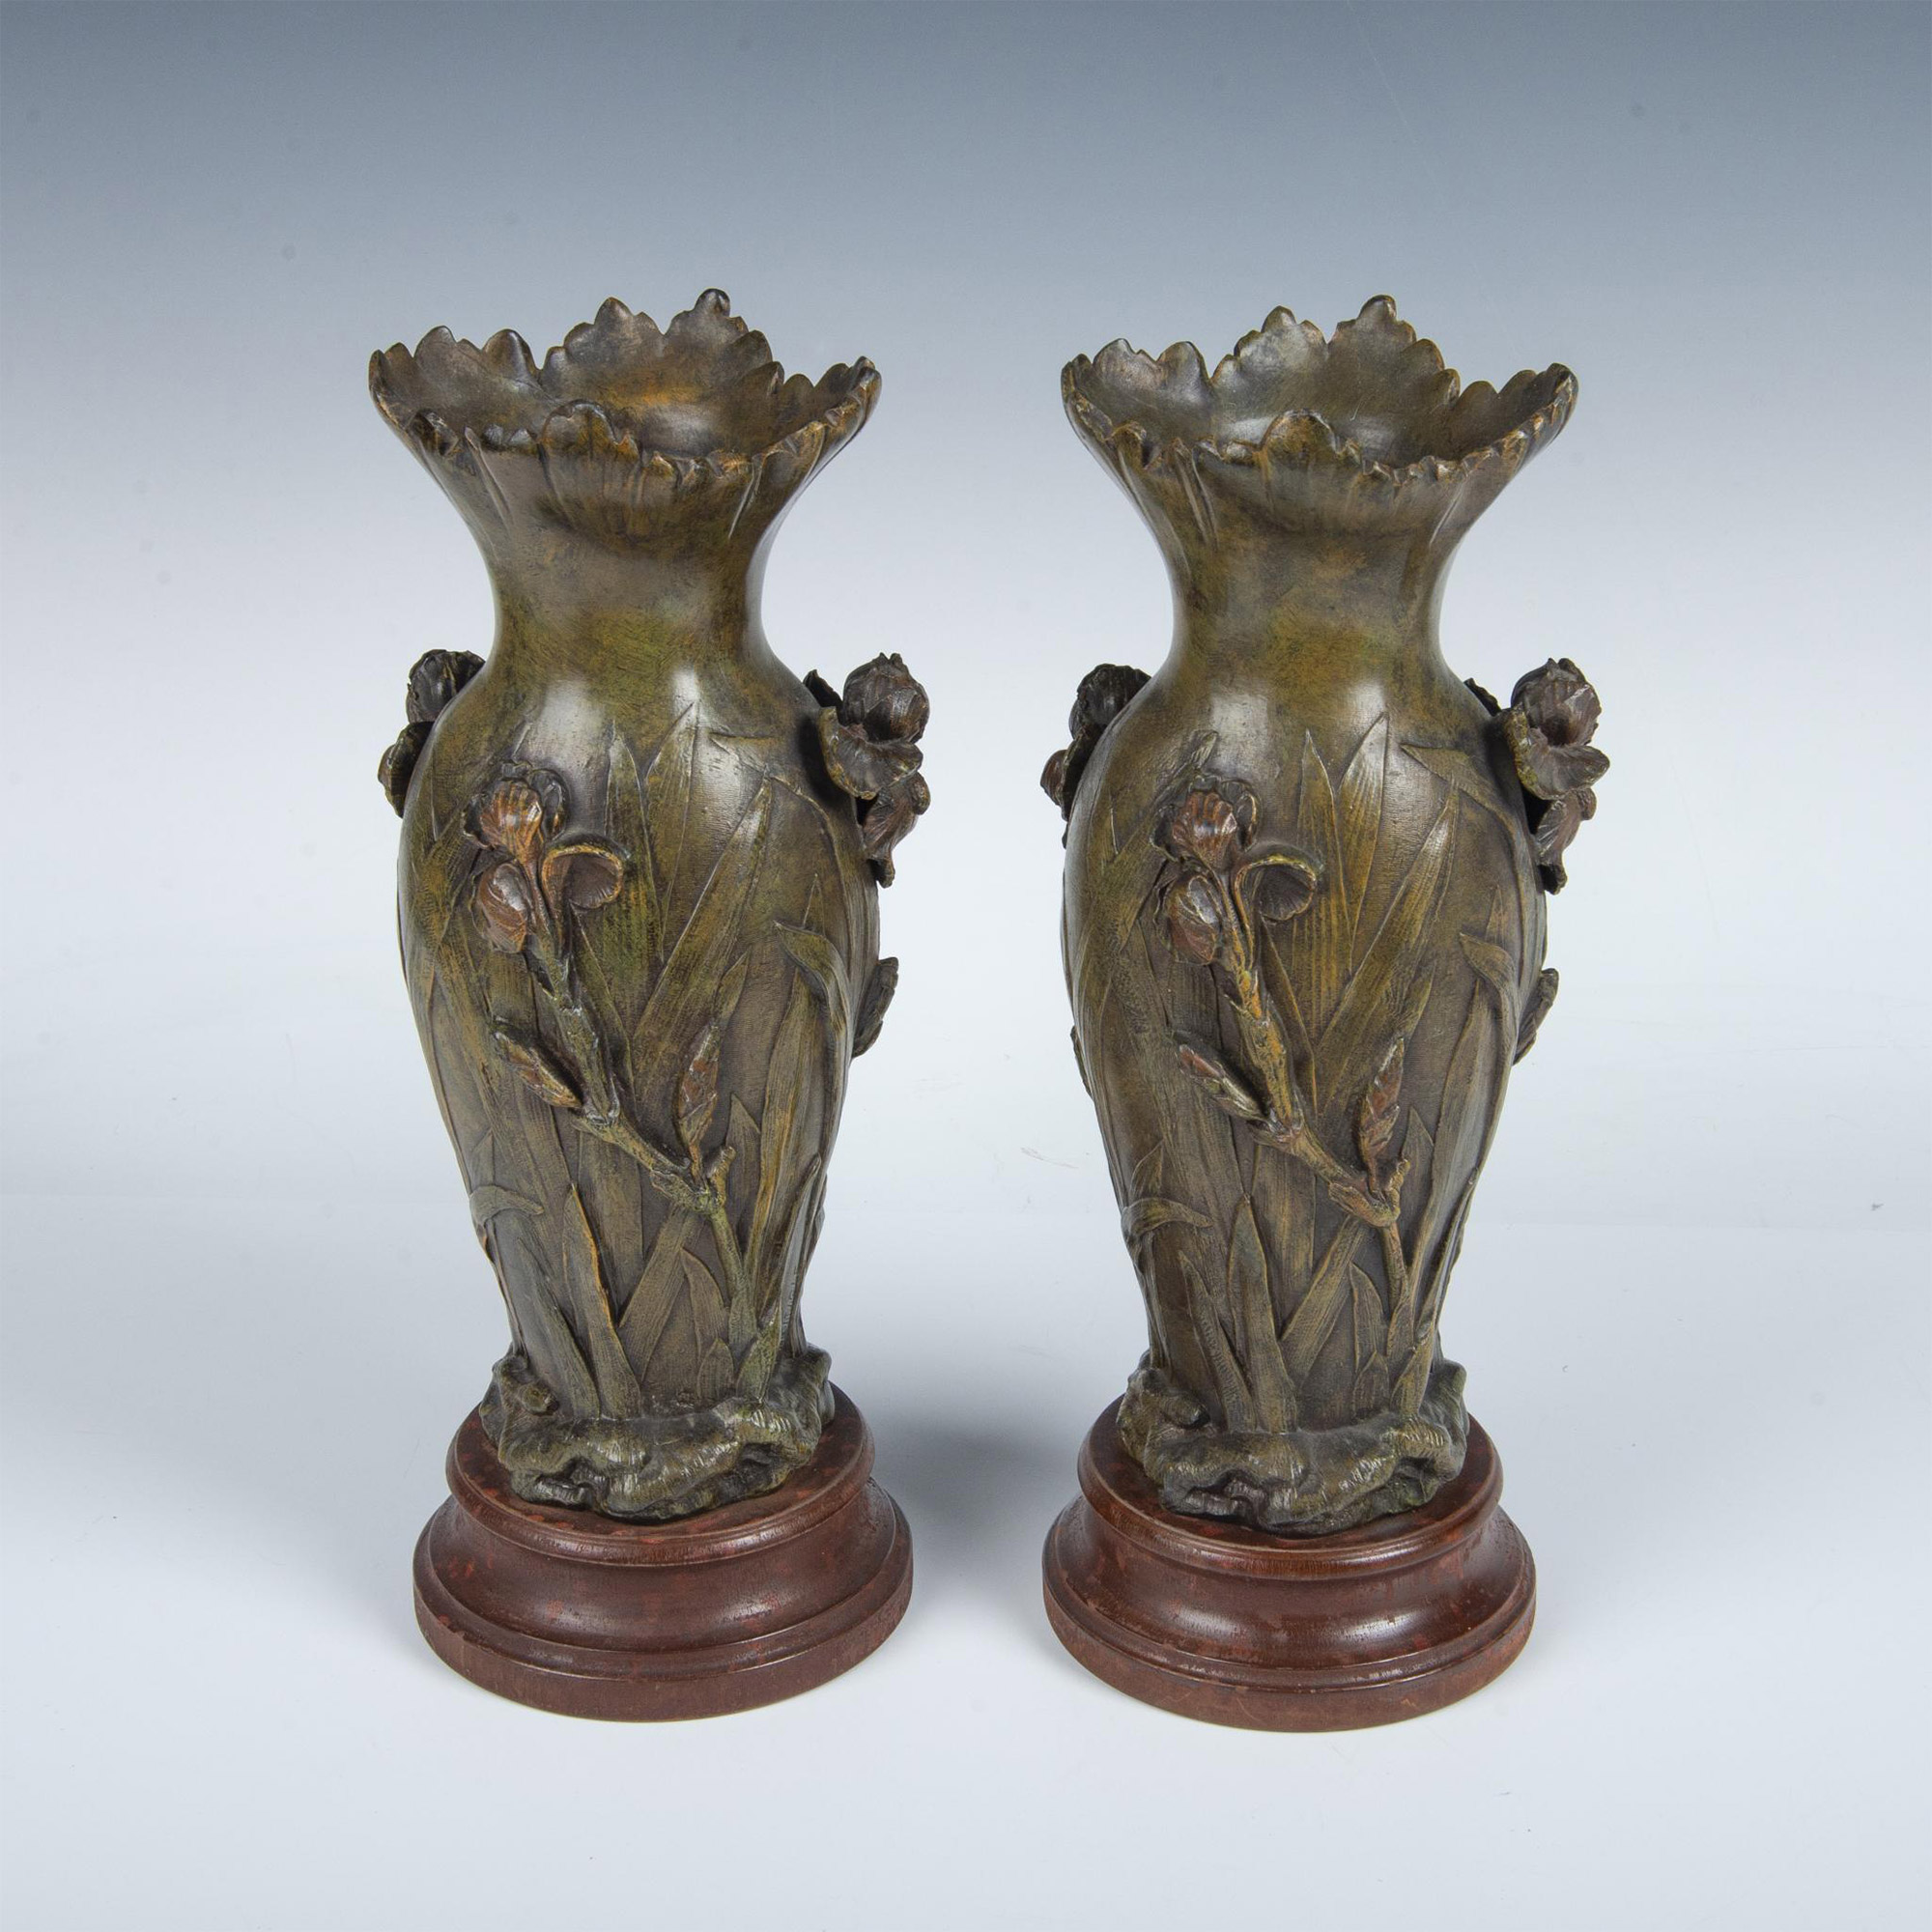 Heingle, Pair of Art Nouveau Patinated Bronze Vases, Signed - Image 2 of 5